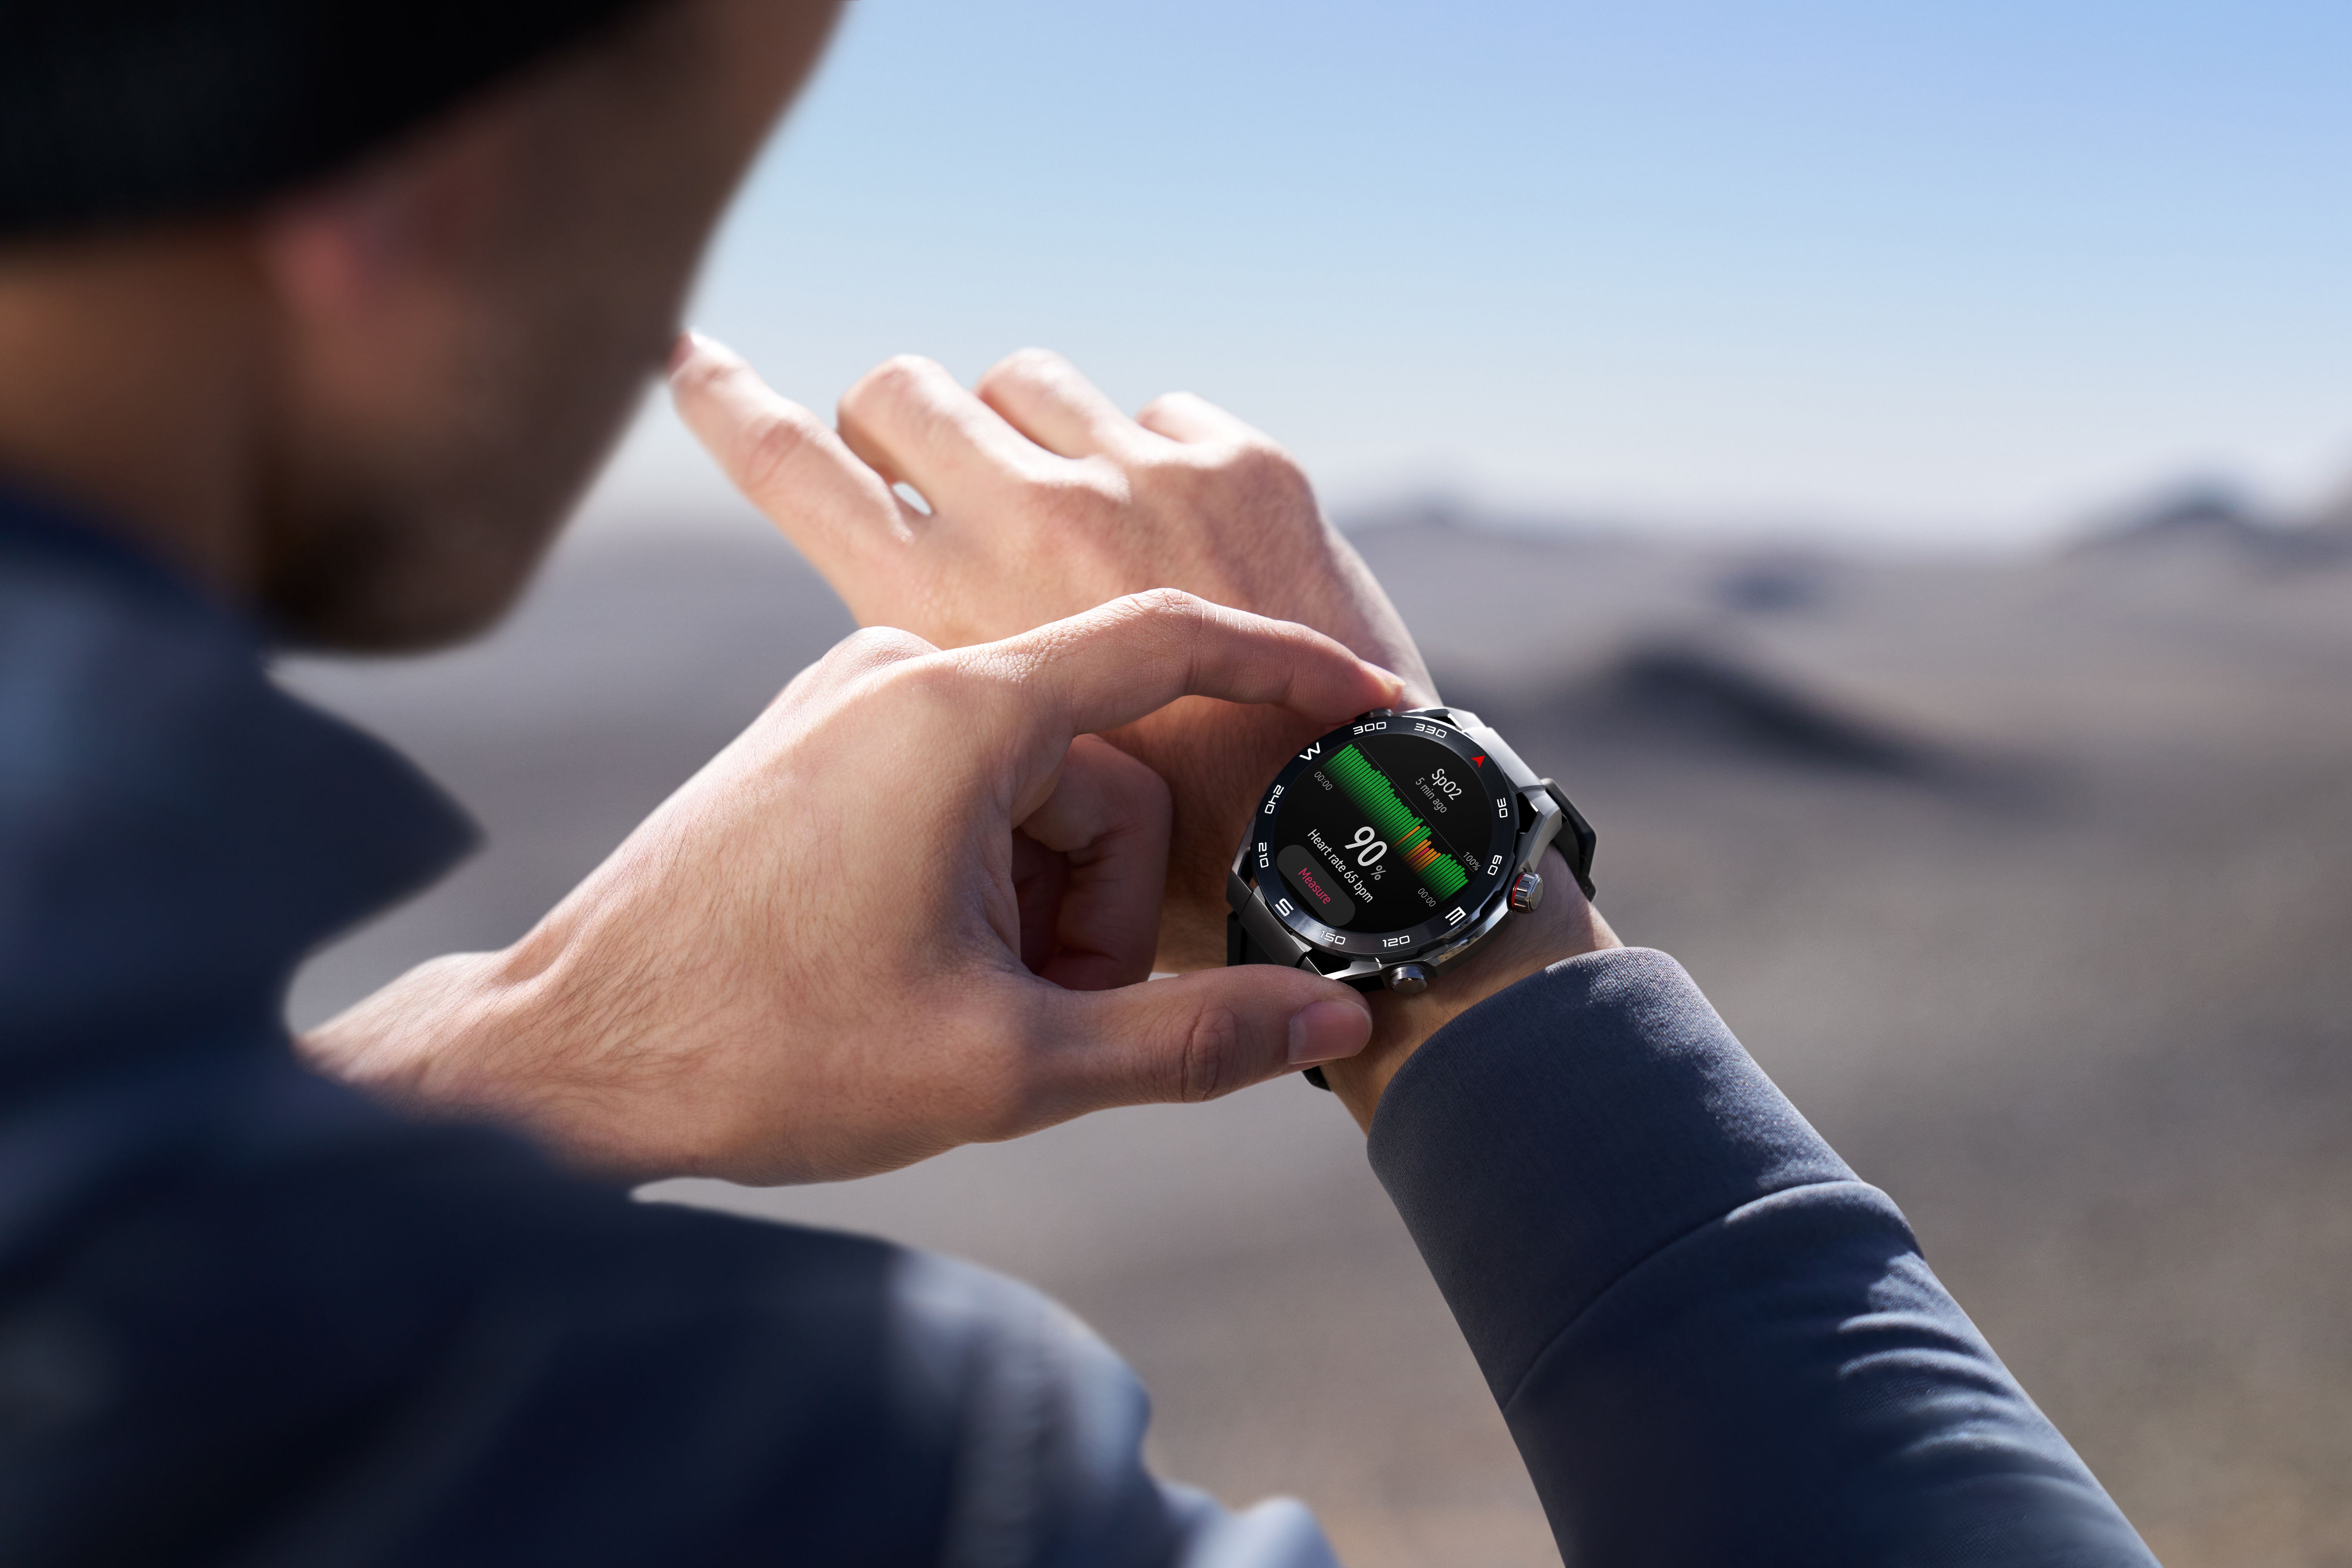 HUAWEI WATCH ULTIMATE EXPEDITION BLACK 55020AGF, Starting at 749,00 €